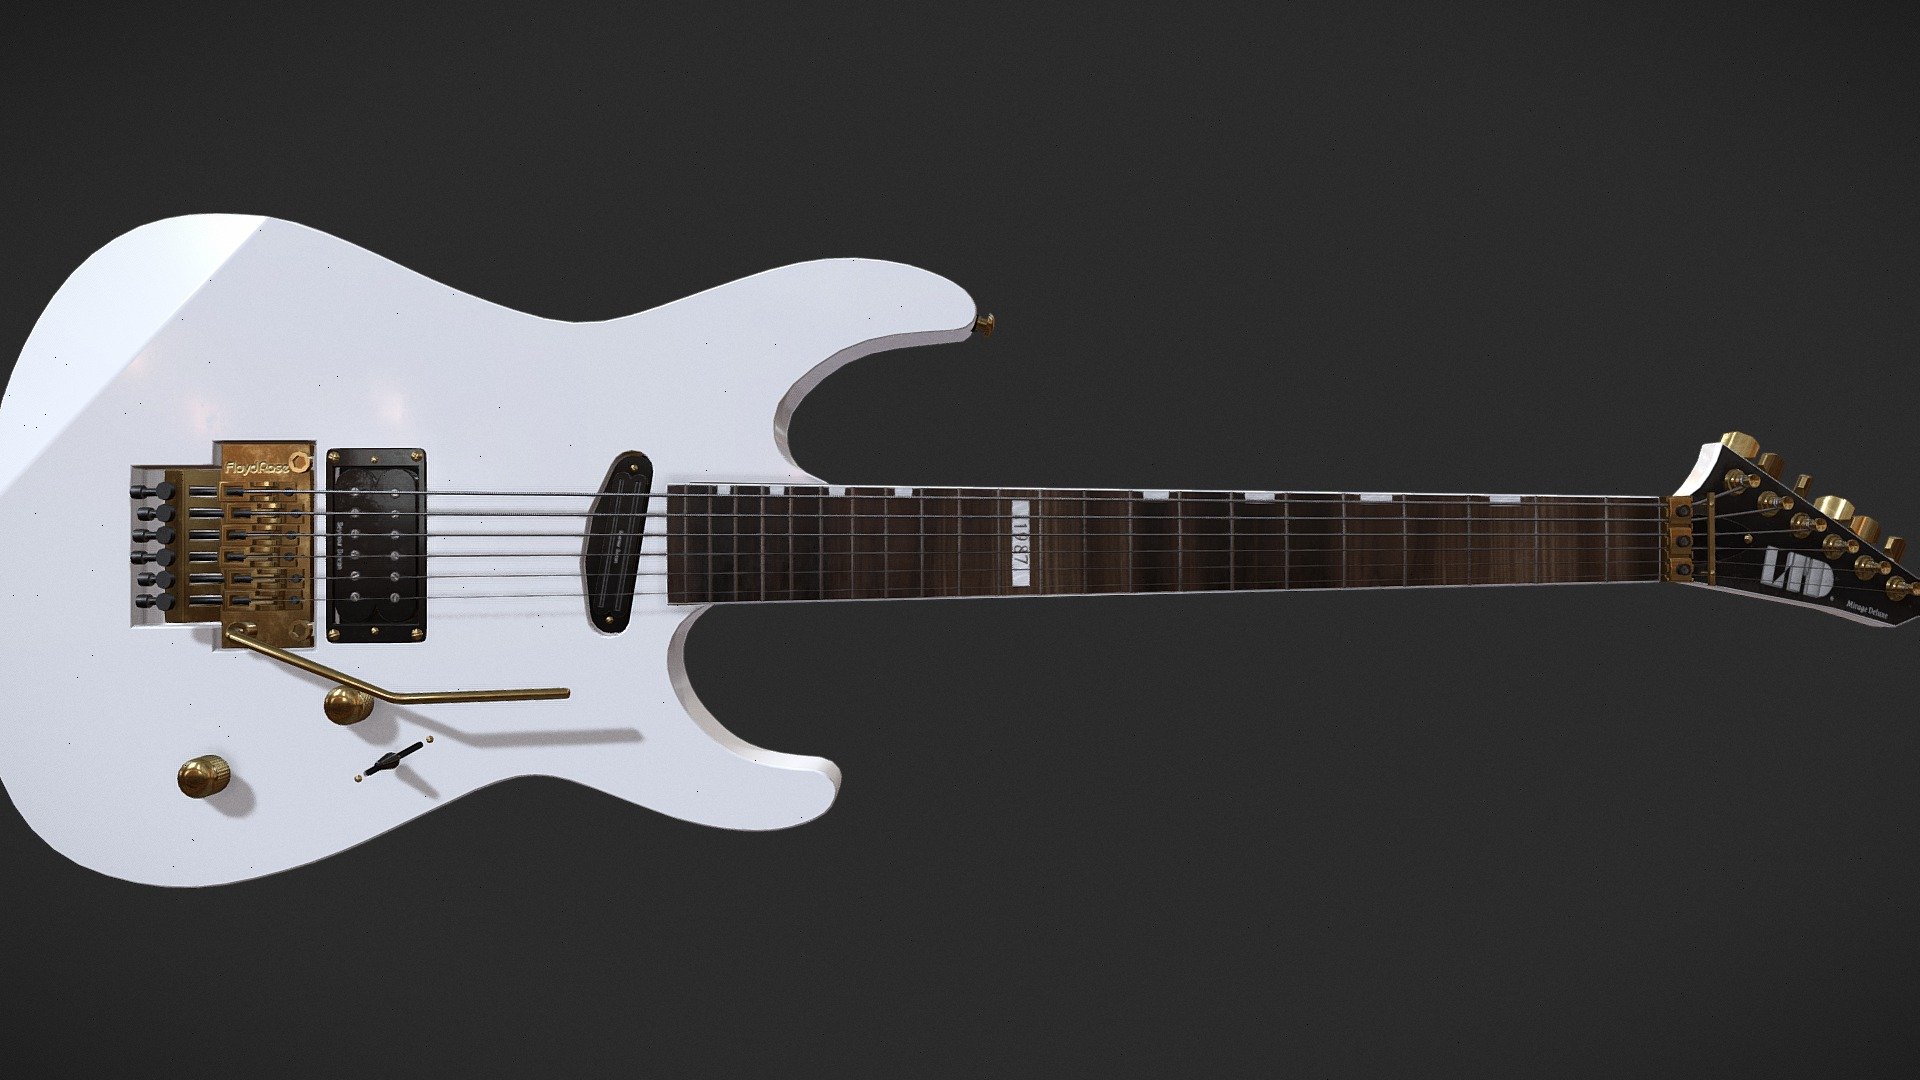 The LTD Mirage Deluxe &lsquo;87 electric guitar combines vintage aesthetics with a modern interpretation, creating a unique look that suits a wide range of musical styles and visual preferences 3d model